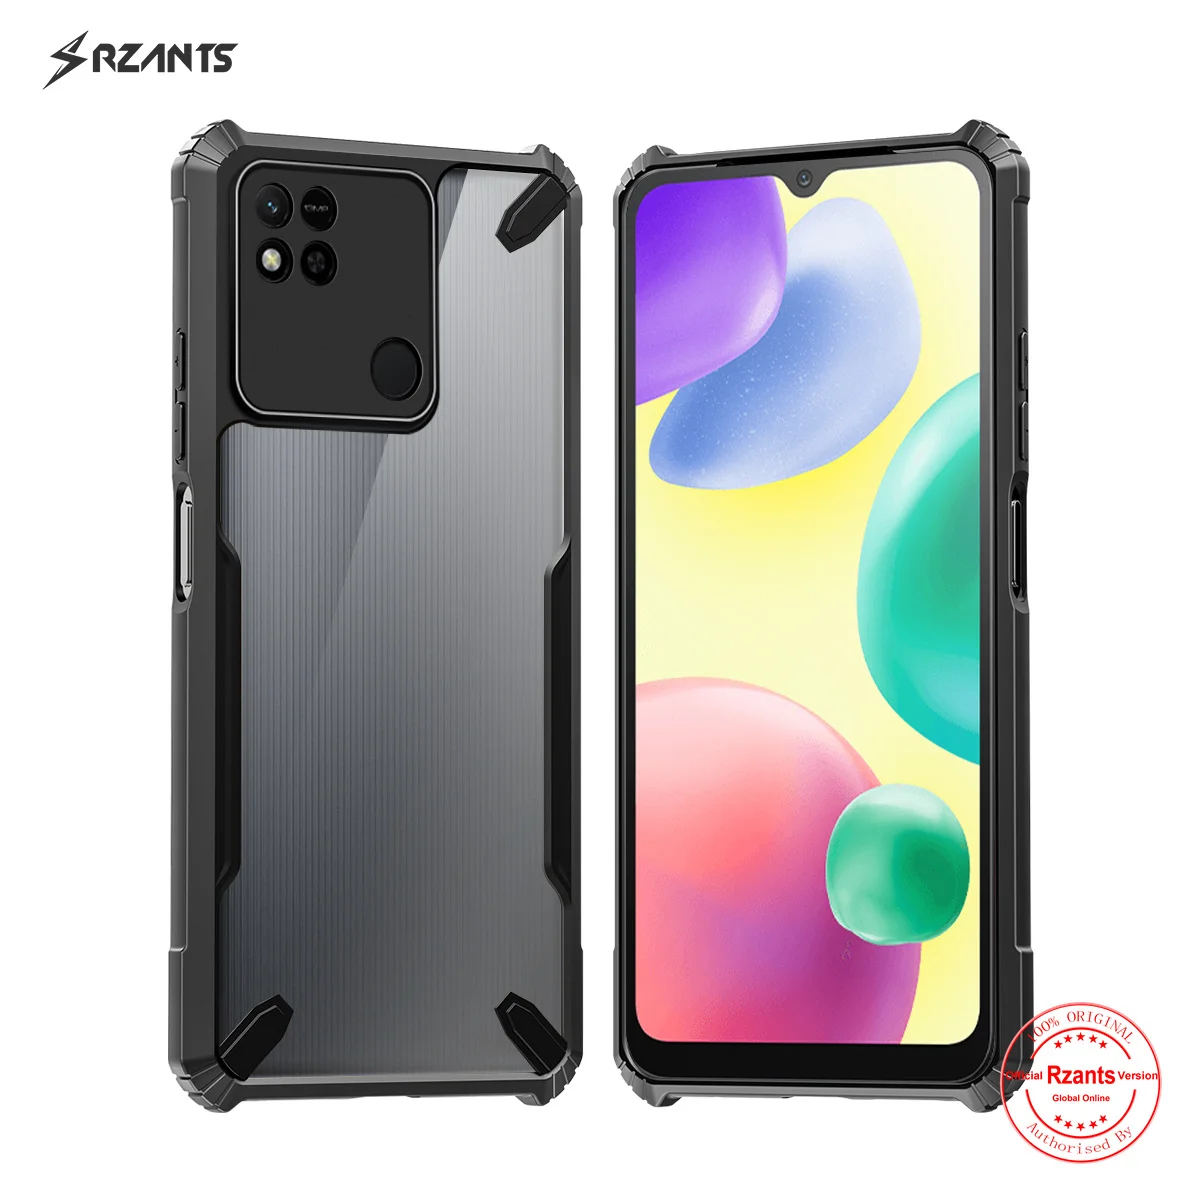 

Rzants For Xiaomi Redmi 9C Redmi 10A Clear Case [Bull] Design Cover Slim Thin Strong Protection AirBag Crystal Phone Casing